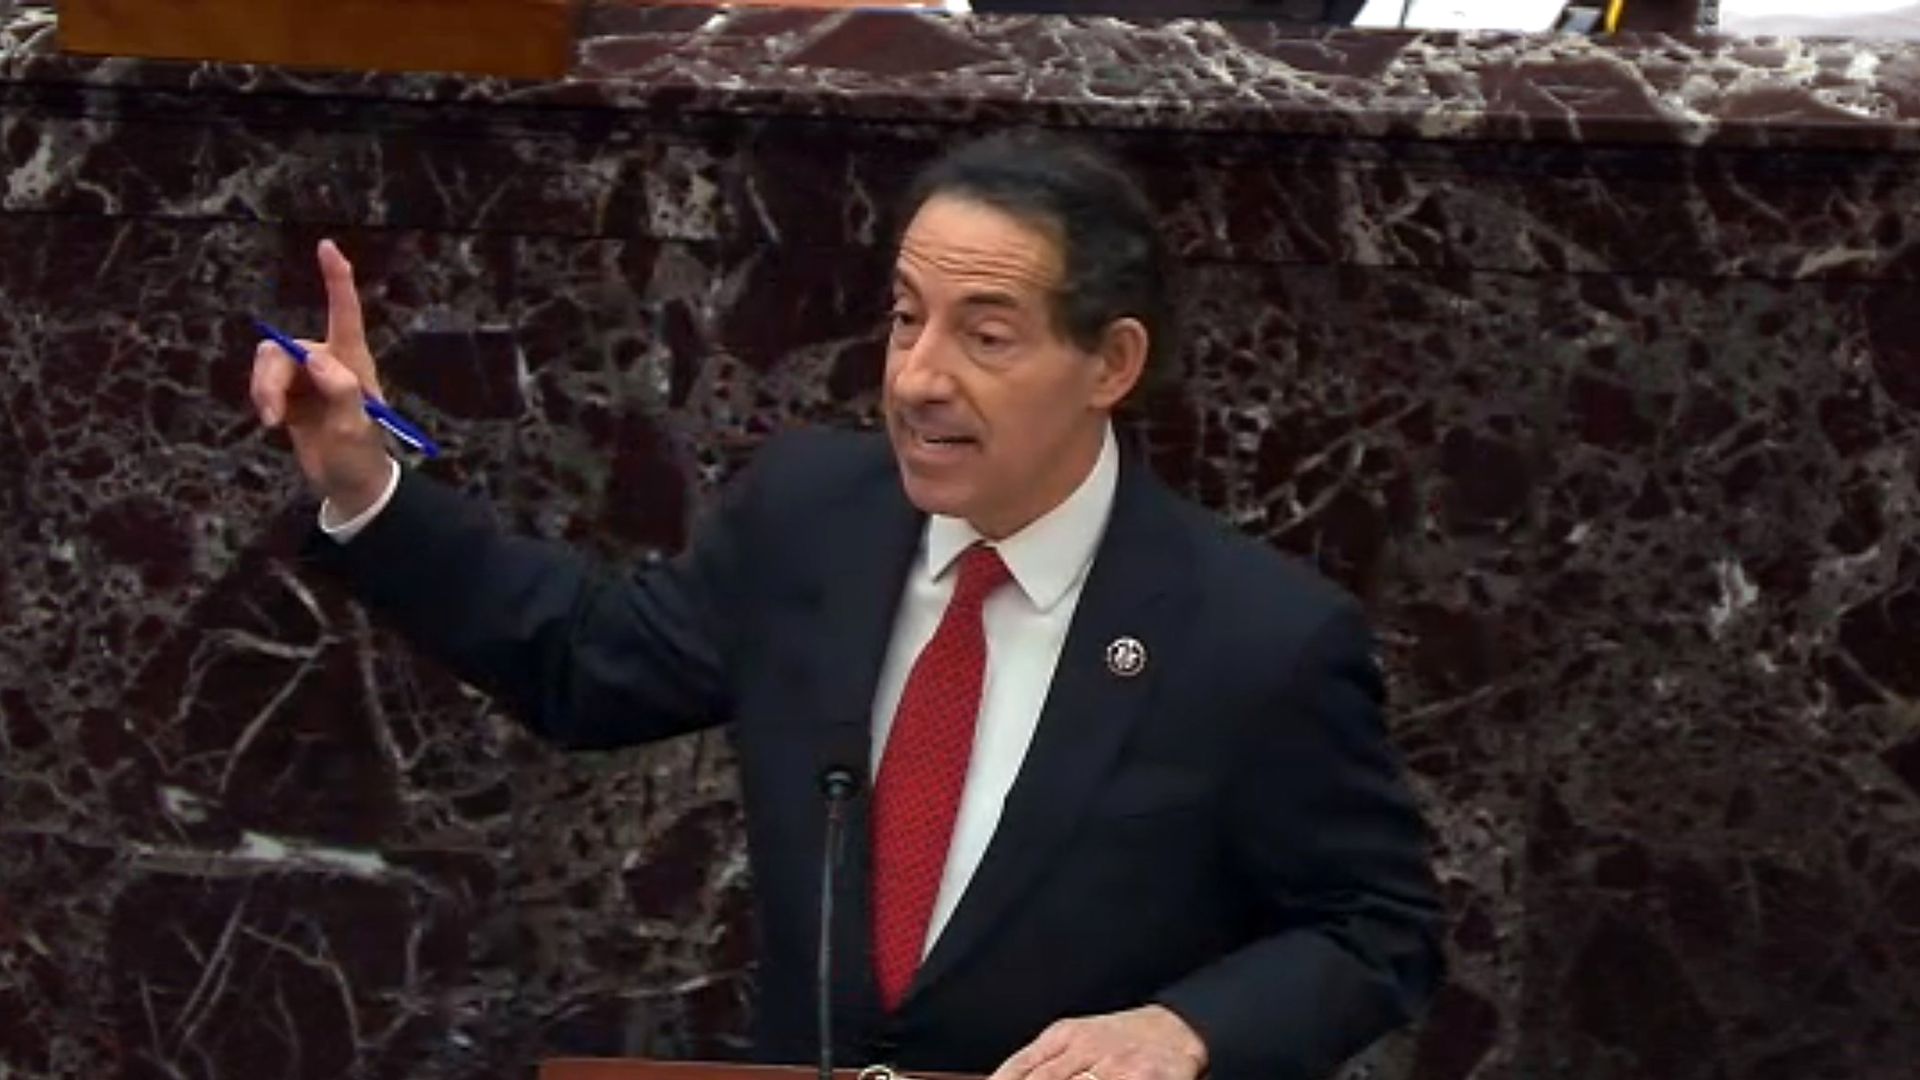 Rep. Jamie Raskin, the lead House impeachment manager, is seen speaking Tuesday.